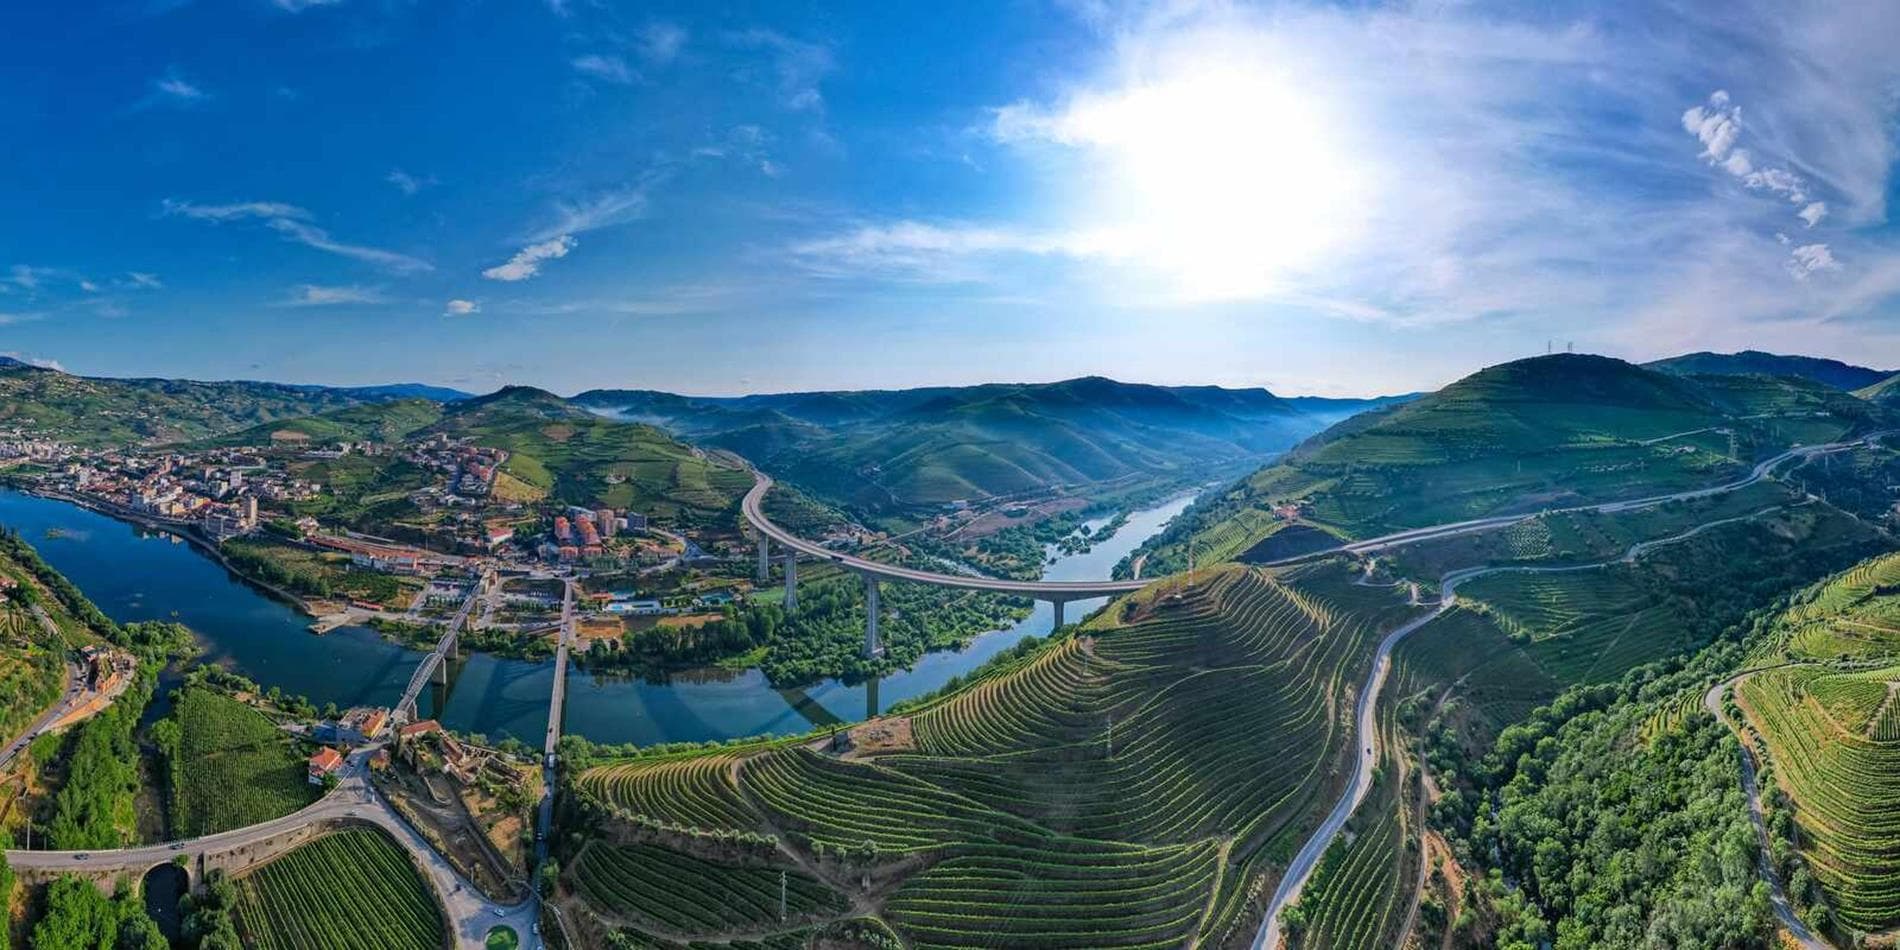 Landscape view of Douro Valley in Portugal